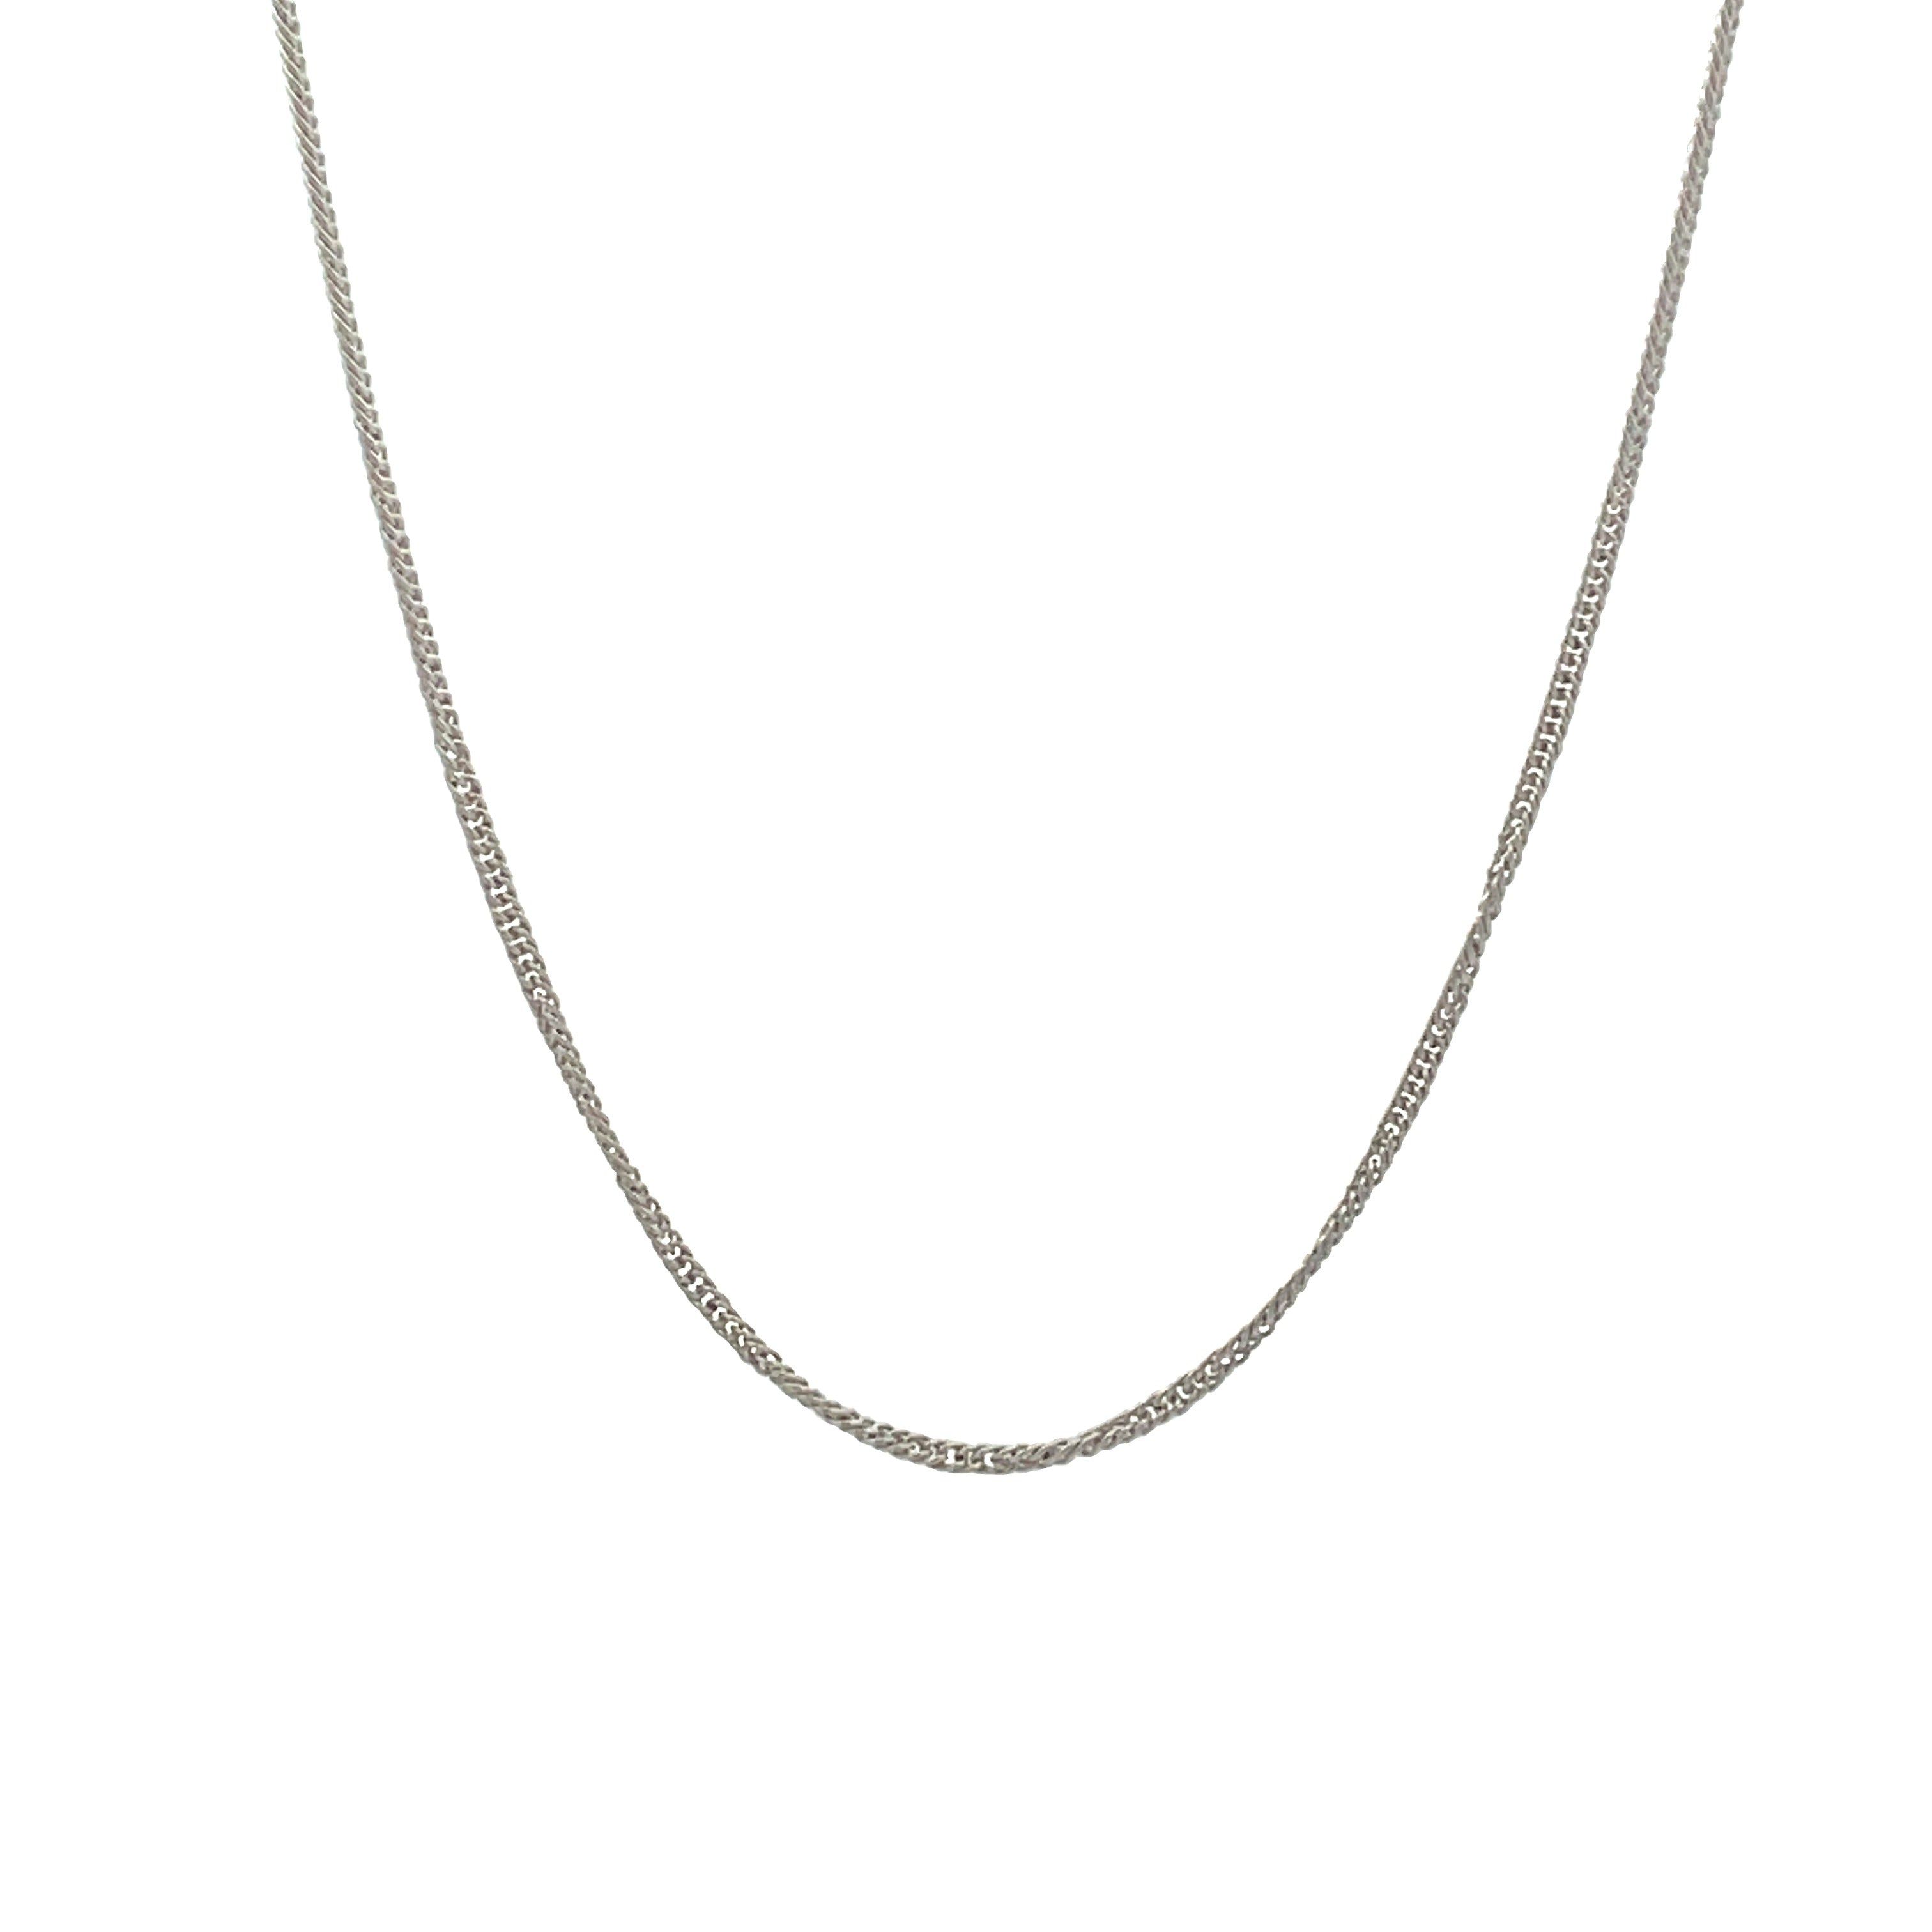 9K White Gold 45cm Curb Chain Necklace